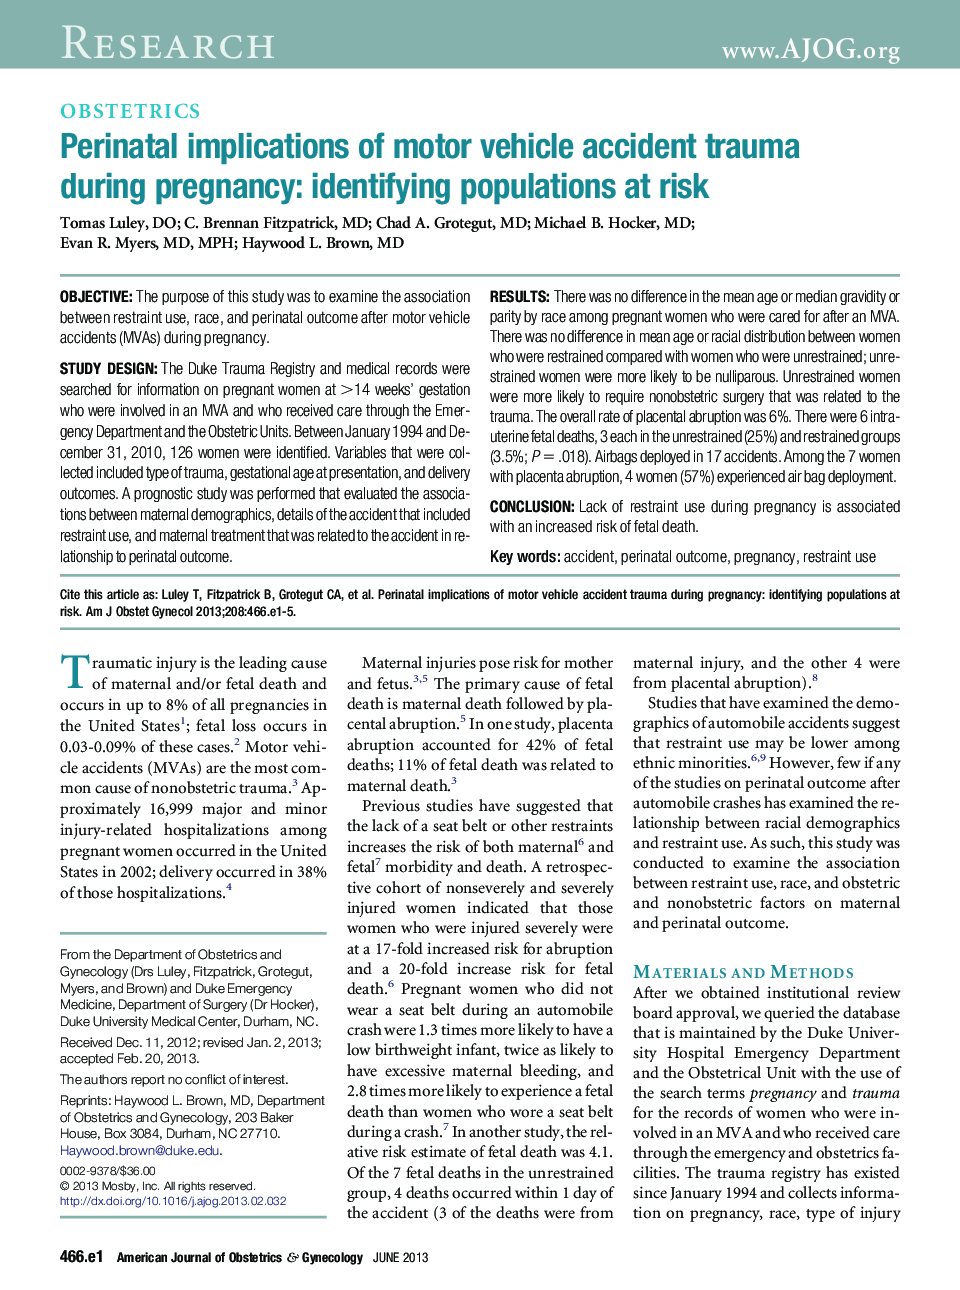 Perinatal implications of motor vehicle accident trauma during pregnancy: identifying populations at risk